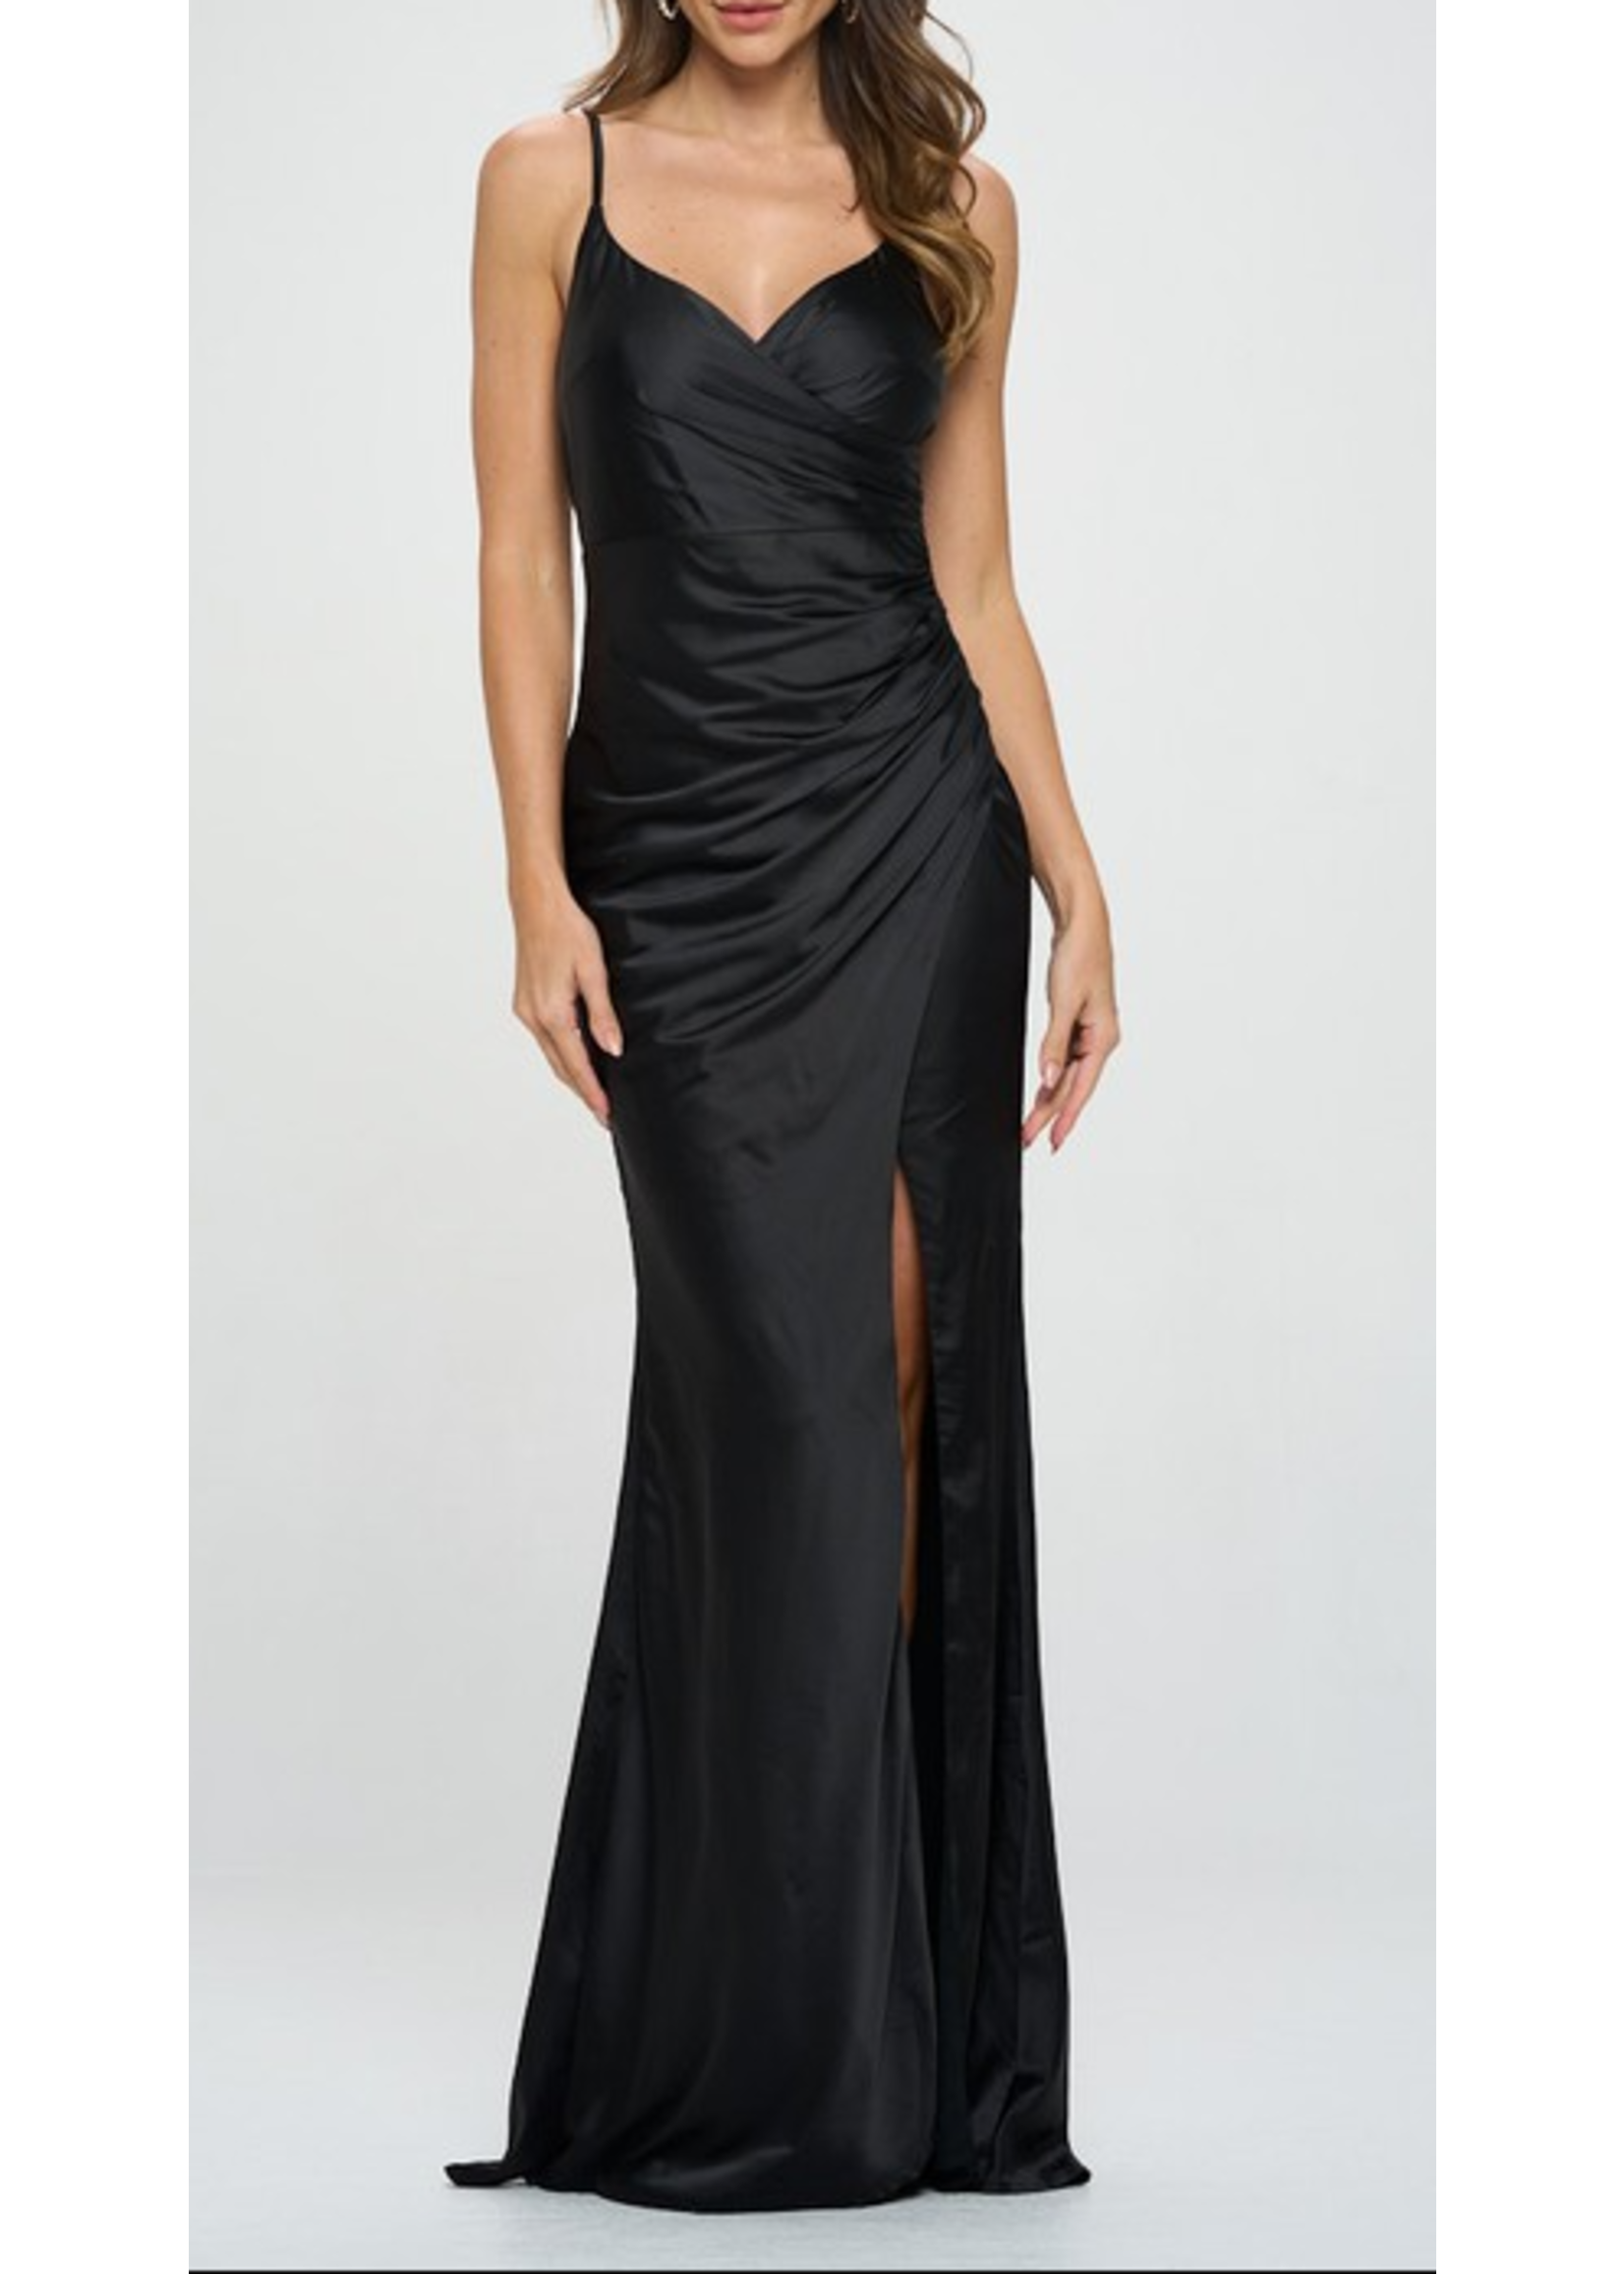 RR1732A - CLASSIC SLEEVELESS SATIN GOWN W ADJUSTABLE STRAPS